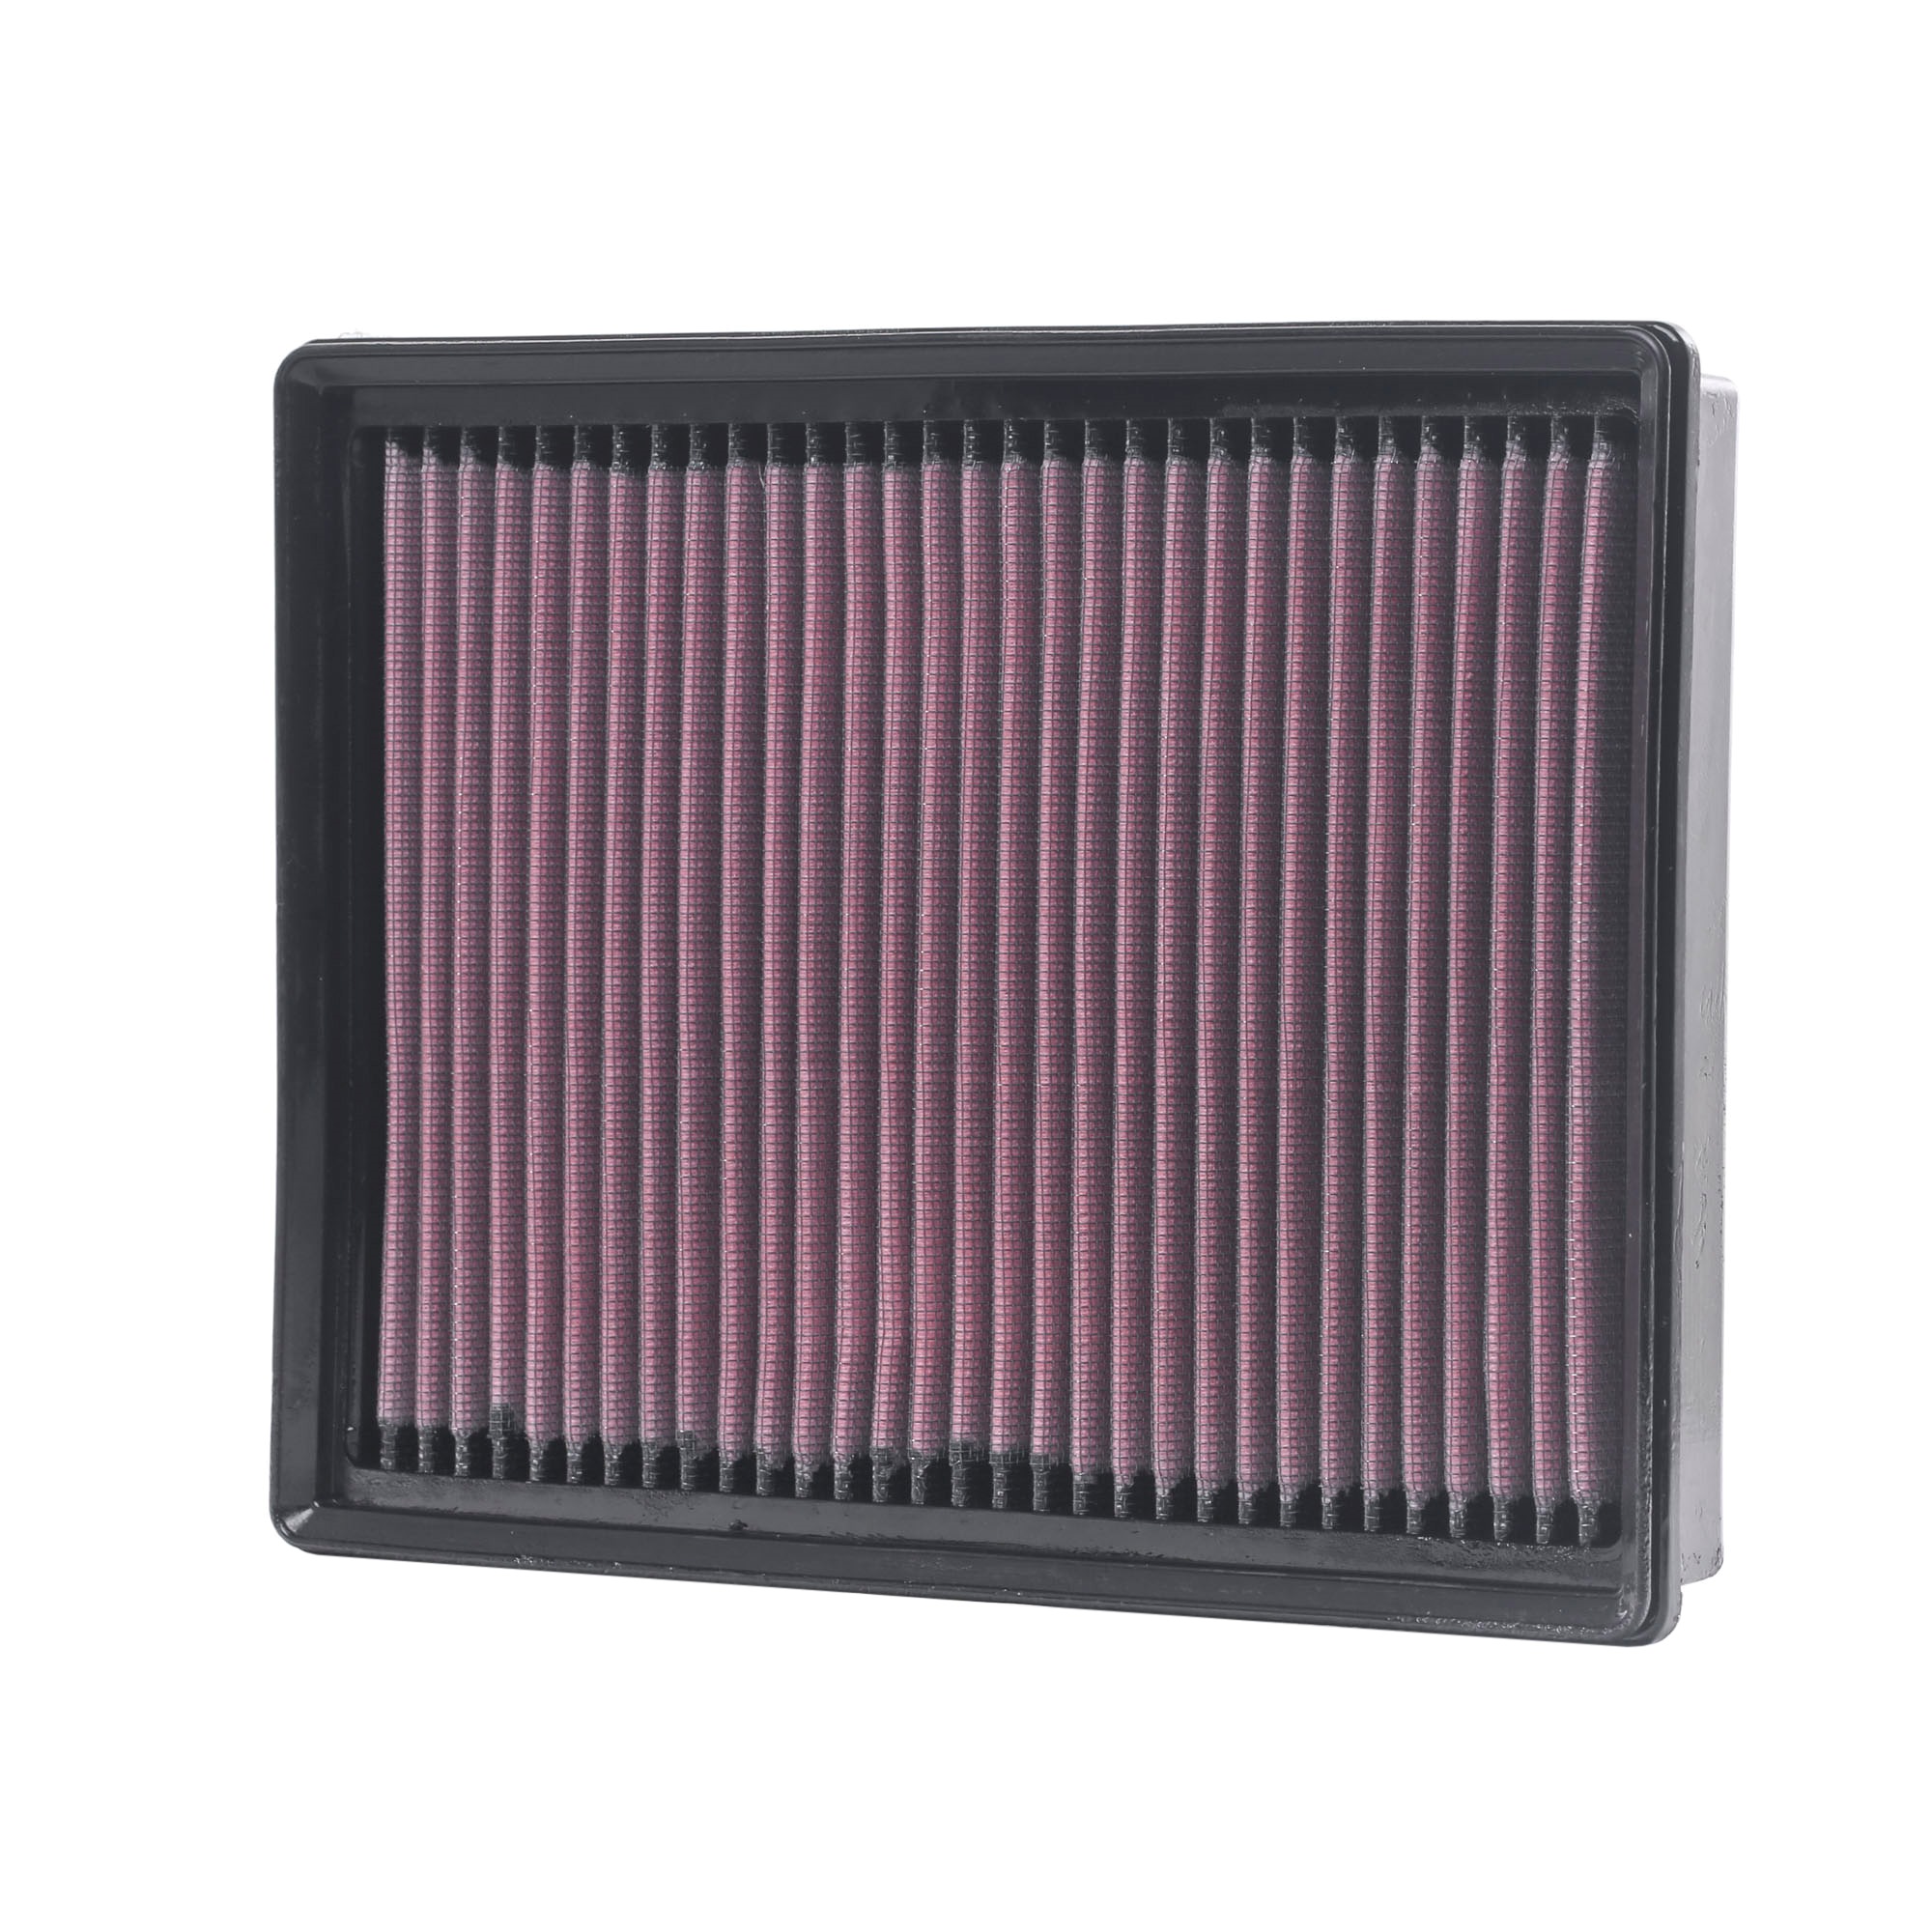 K&N Filters 43mm, 205mm, 268mm, Square, Long-life Filter Length: 268mm, Width: 205mm, Height: 43mm Engine air filter 33-3131 buy